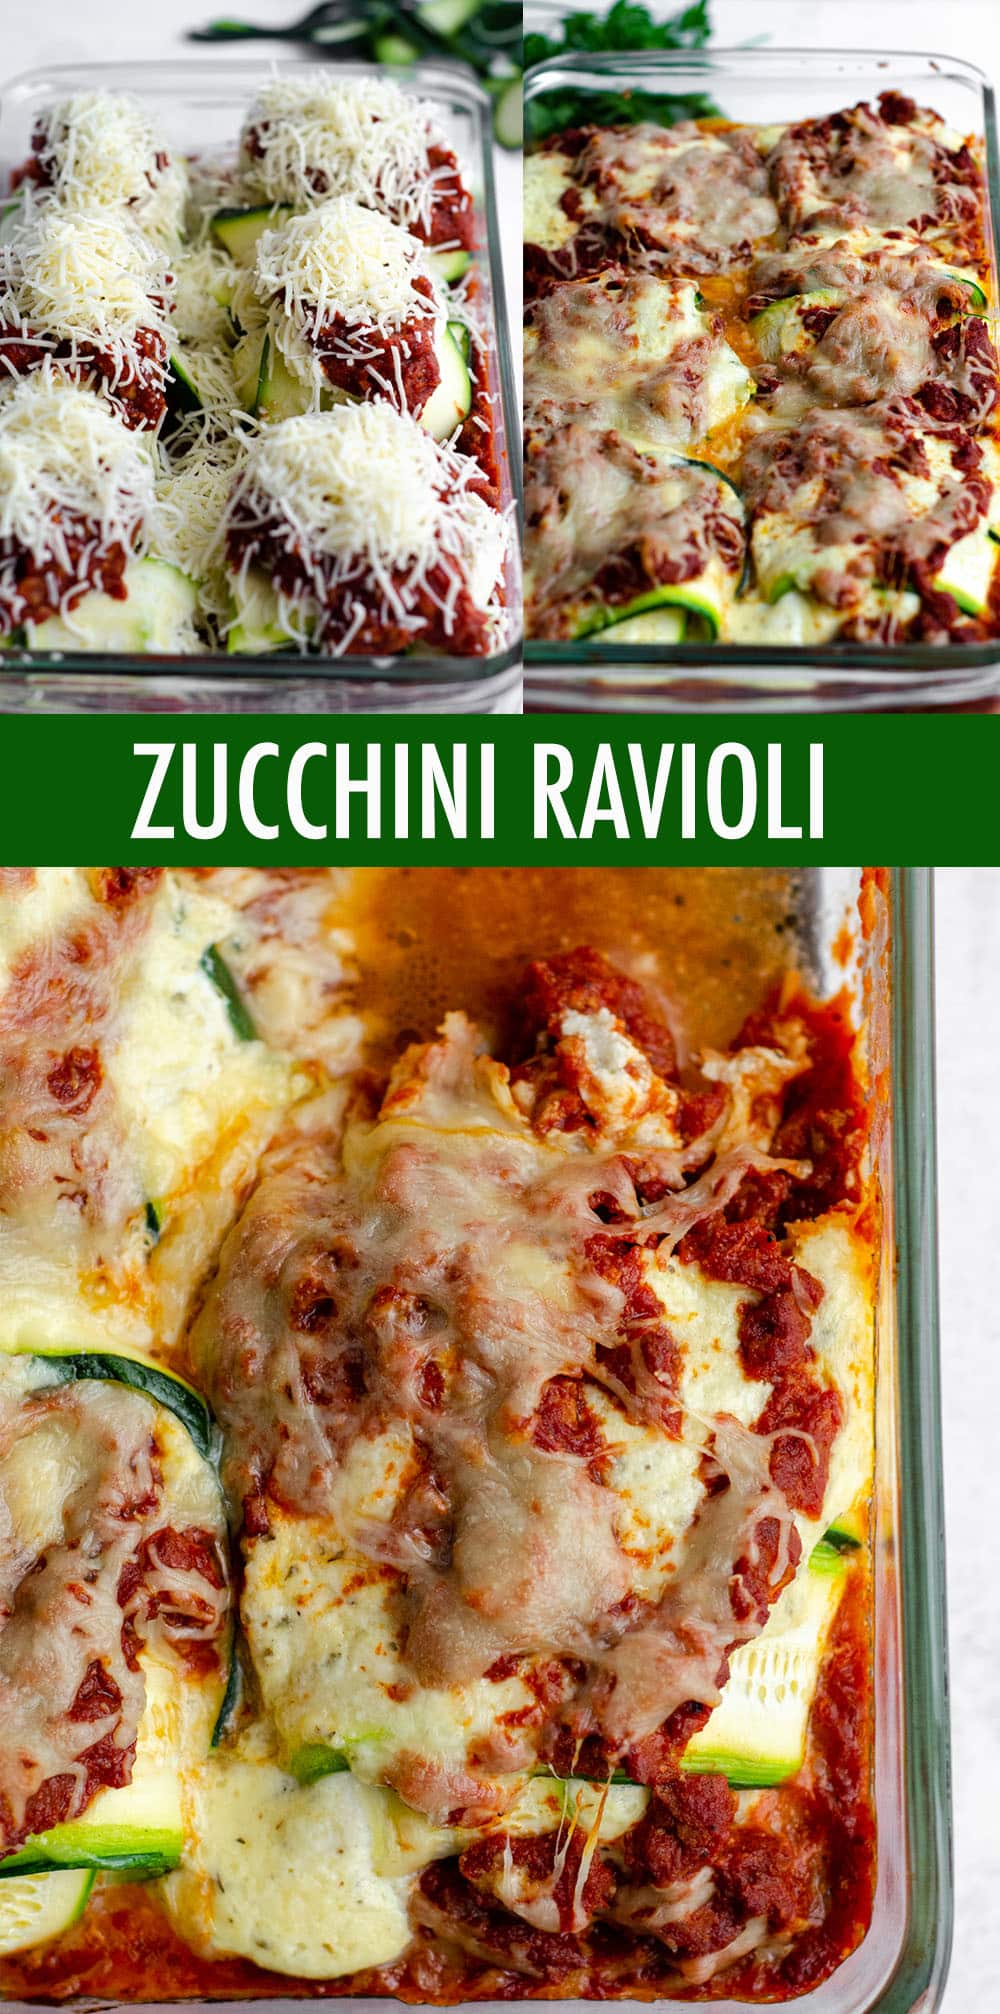 Traditional ravioli get a vegetable makeover-- use zucchini in place of pasta for a gluten free, keto, or low carb ravioli substitute. These simple zucchini ravioli bring all the flavor and filling without the noodles! via @frshaprilflours